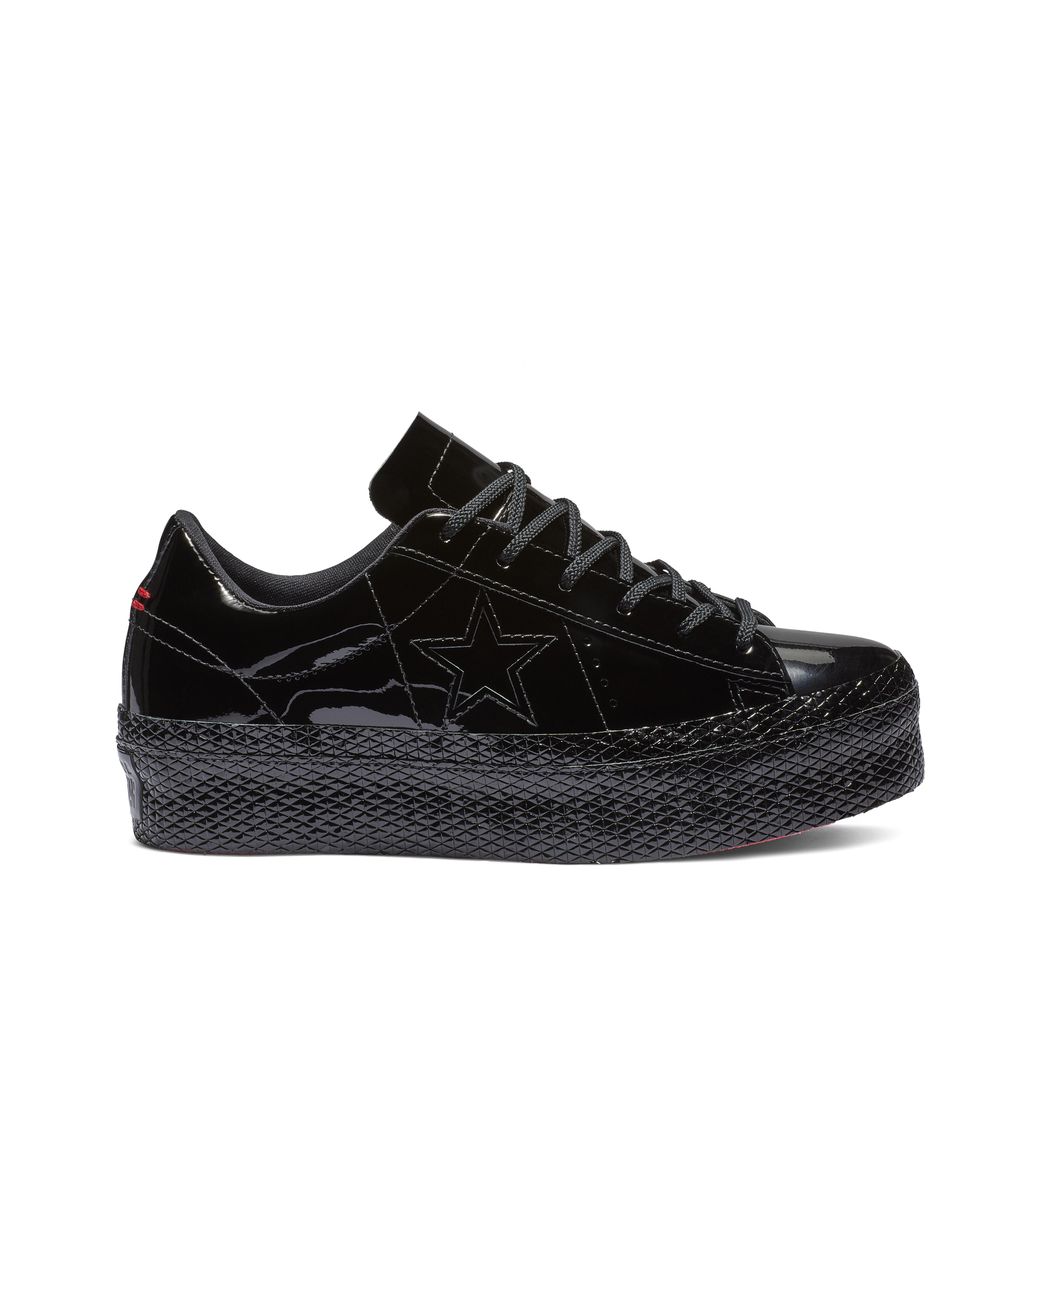 Converse One Star Platform Patent '90s Leather Low Top in Black | Lyst